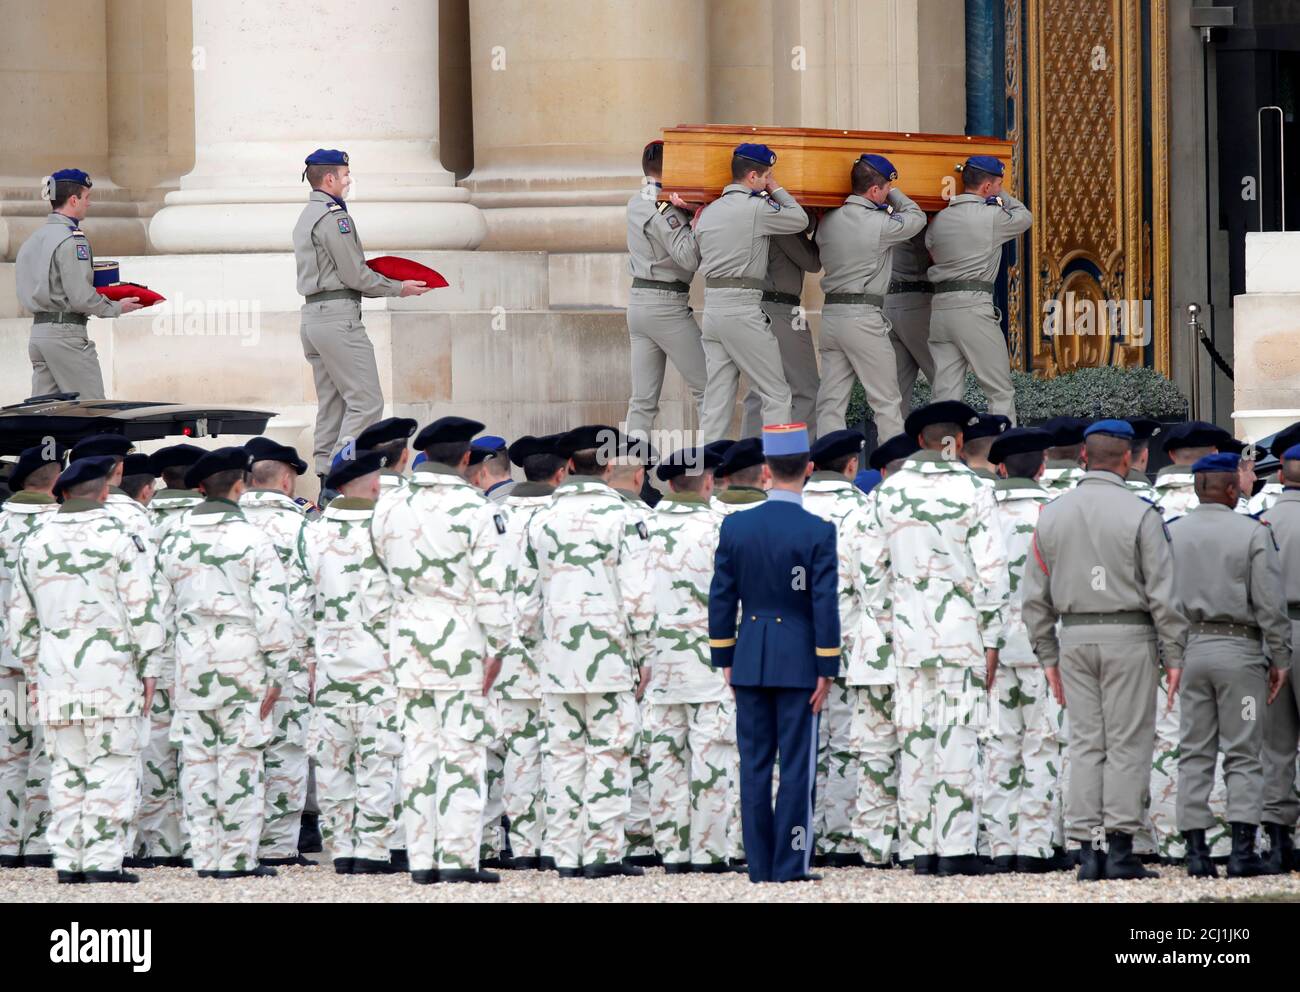 Soldiers carry the coffins of late thirteen French soldiers killed in Mali, before a ceremony at the Hotel National des Invalides in Paris, France, December 2, 2019. French soldiers Julien Carrette, Benjamin Gireud, Romain Salles de Saint-Paul, Clement Frison-Roche, Nicolas Megard, Romain Chomel de Jarnieu, Pierre Bockel, Alex Morisse, Jeremy Leusie, Alexandre Protin, Antoine Serre, Valentin Duval, Andrei Jouk died in Mali when their helicopters collided in the dark last week as they hunted for Islamist militants.   REUTERS/Charles Platiau Stock Photo